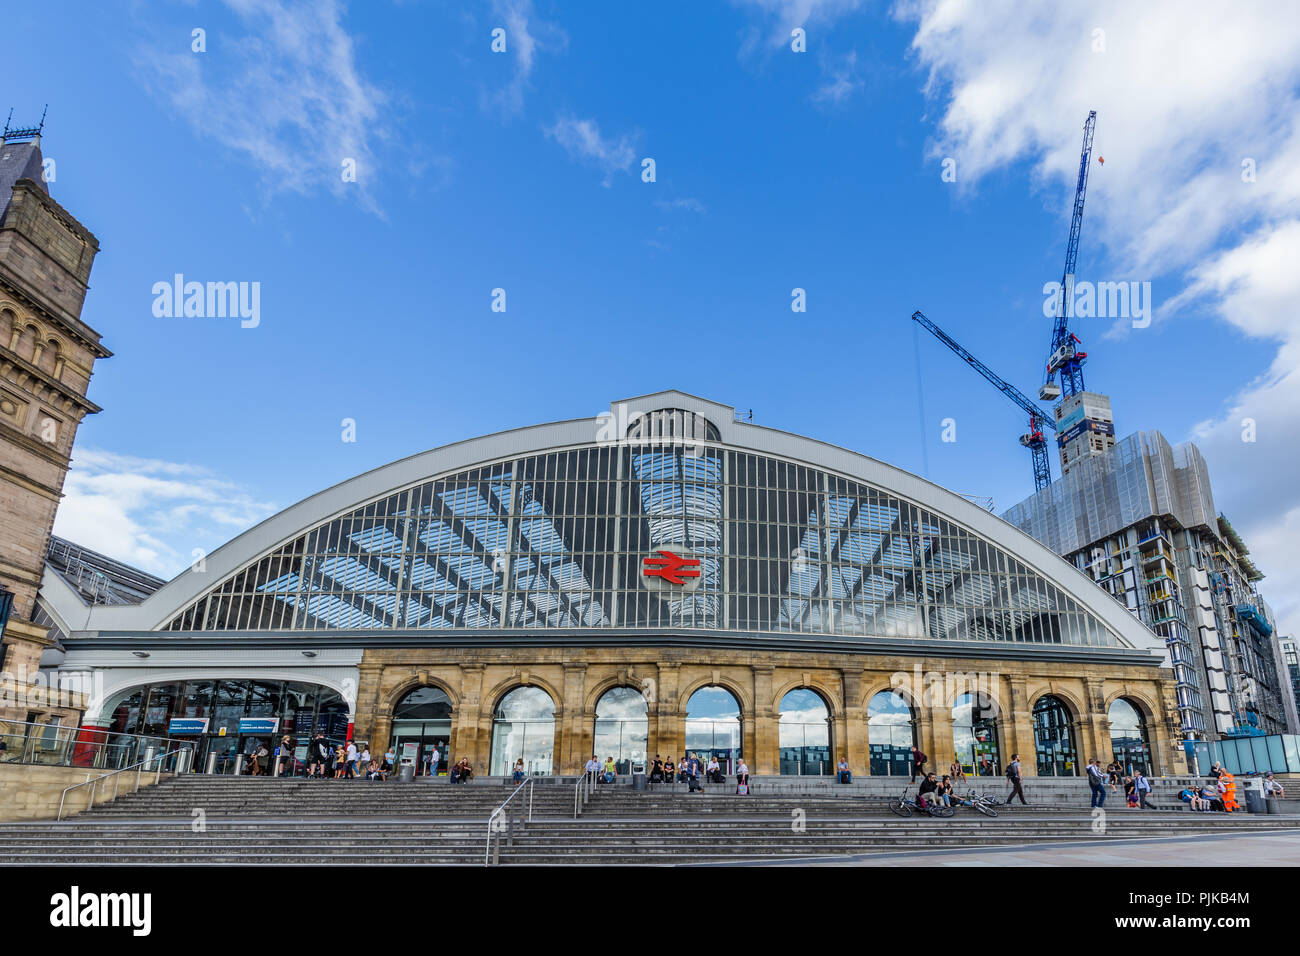 Lime street train station in LIverpool, UK Stock Photo